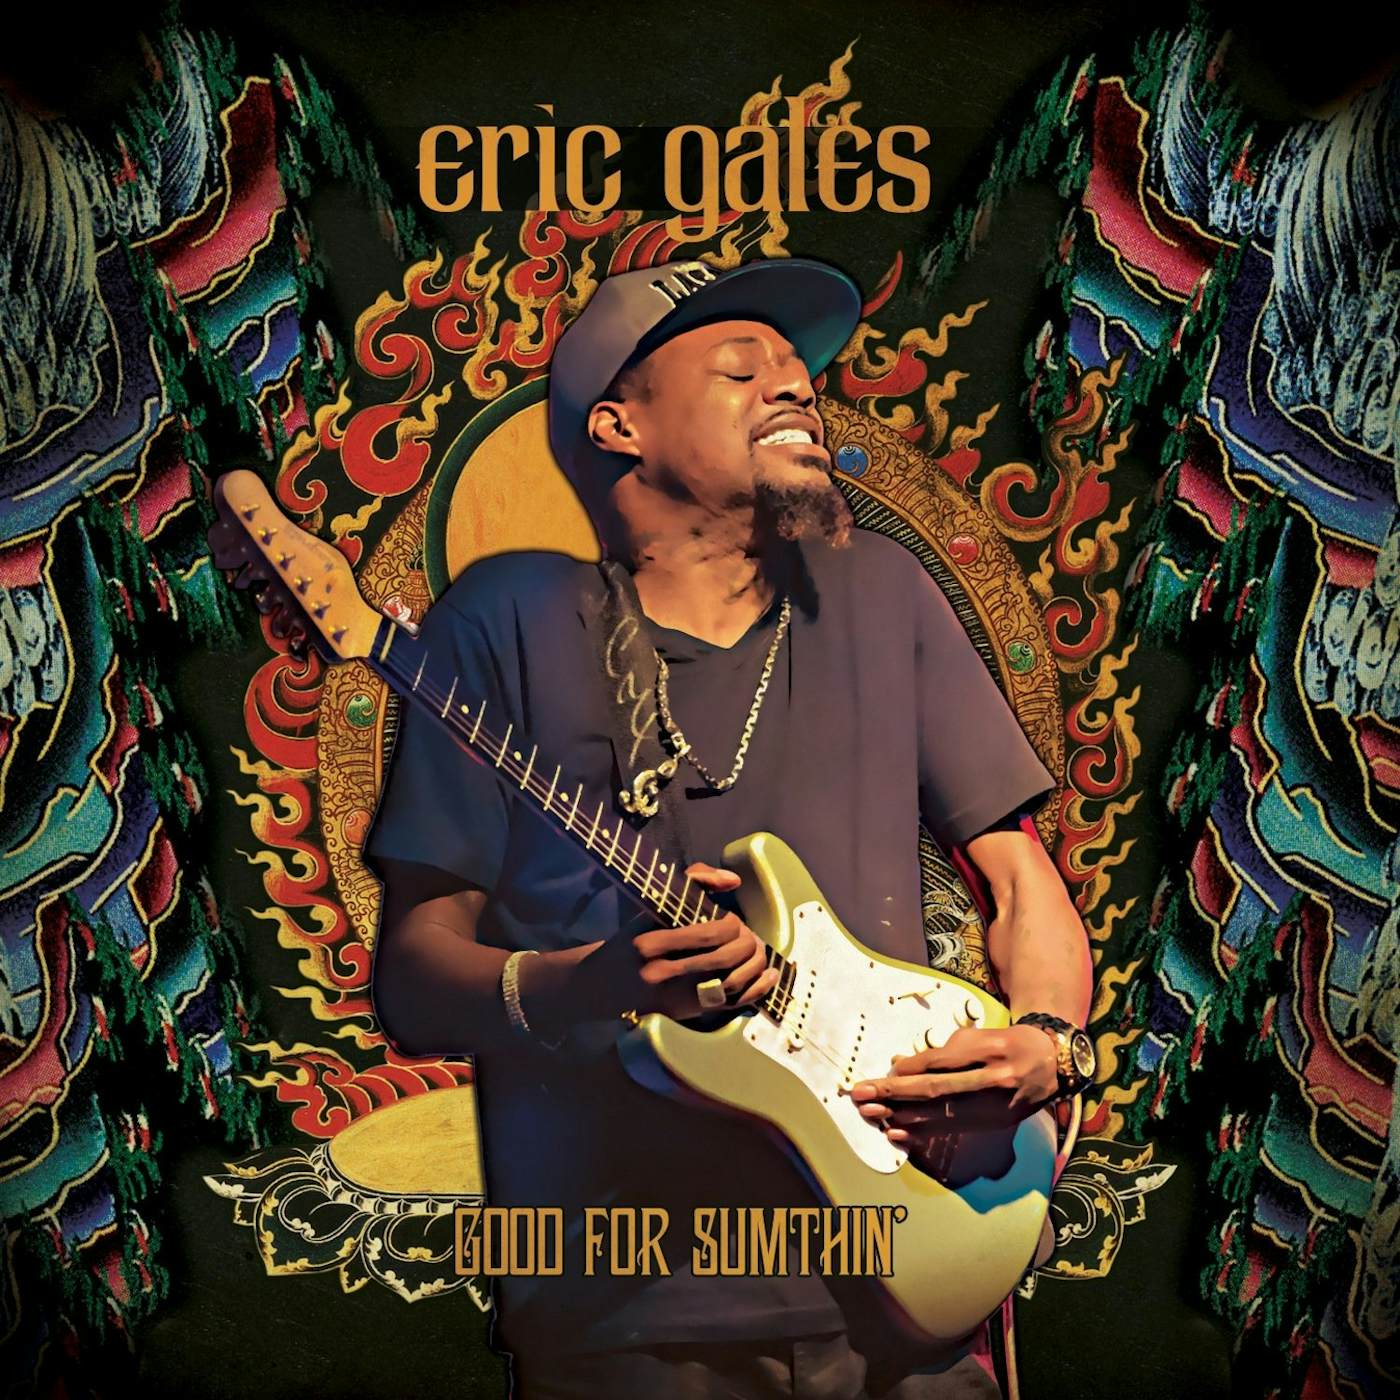 Eric Gales GOOD FOR SUMTHIN Vinyl Record